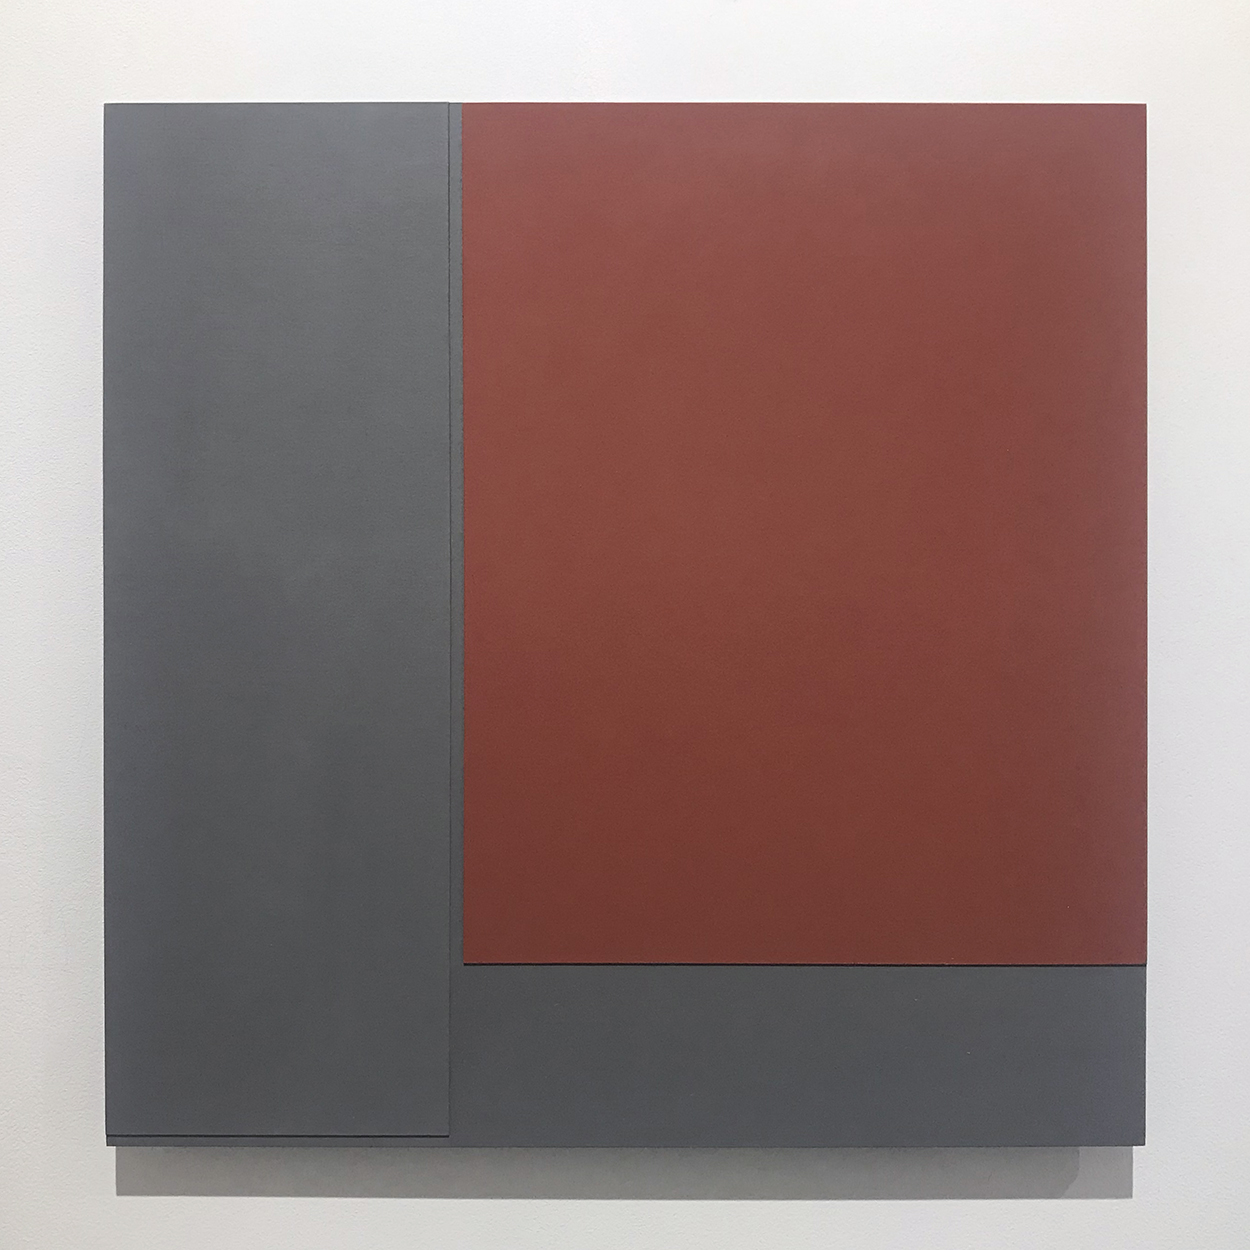 TS2206<br>Gesso on panel, 30 x 30 cm, 2022<br>¥120,000 - 240,000